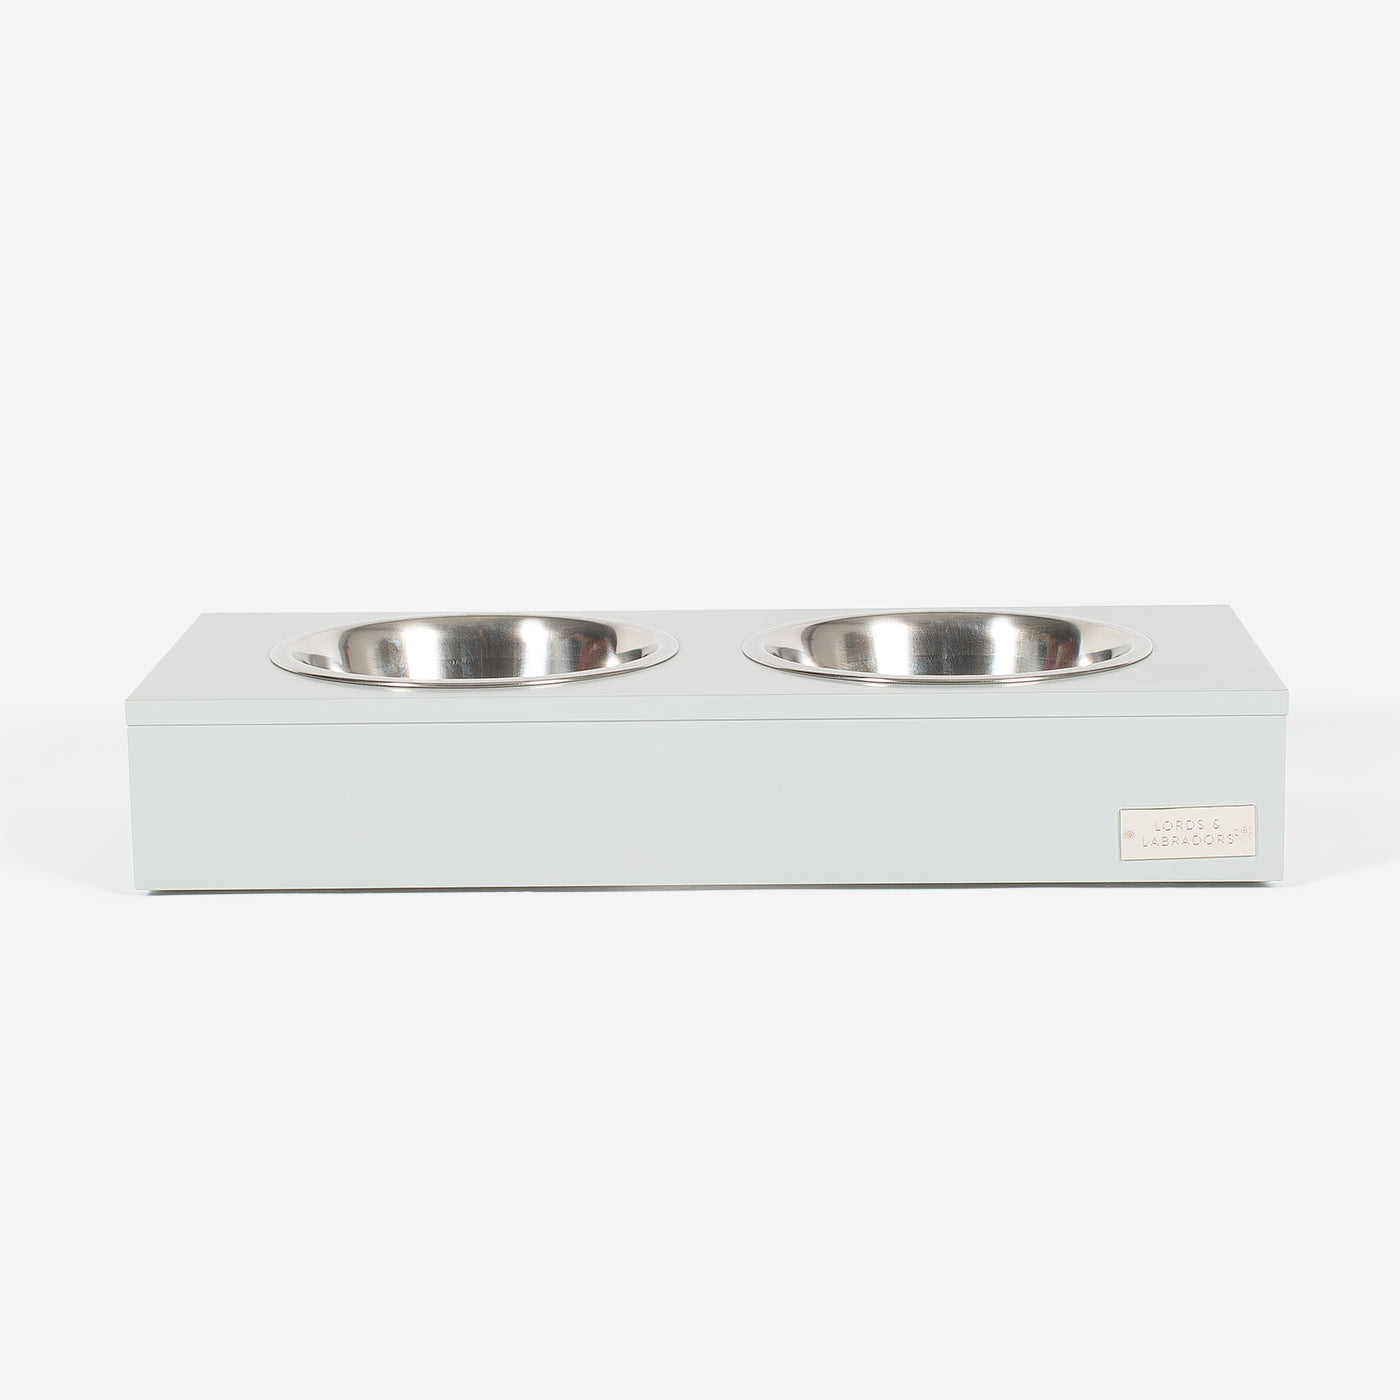 Present your furry friend with our luxuriously Wooden Wall Mounted Pet Feeder in Grey by Lords & Labradors US